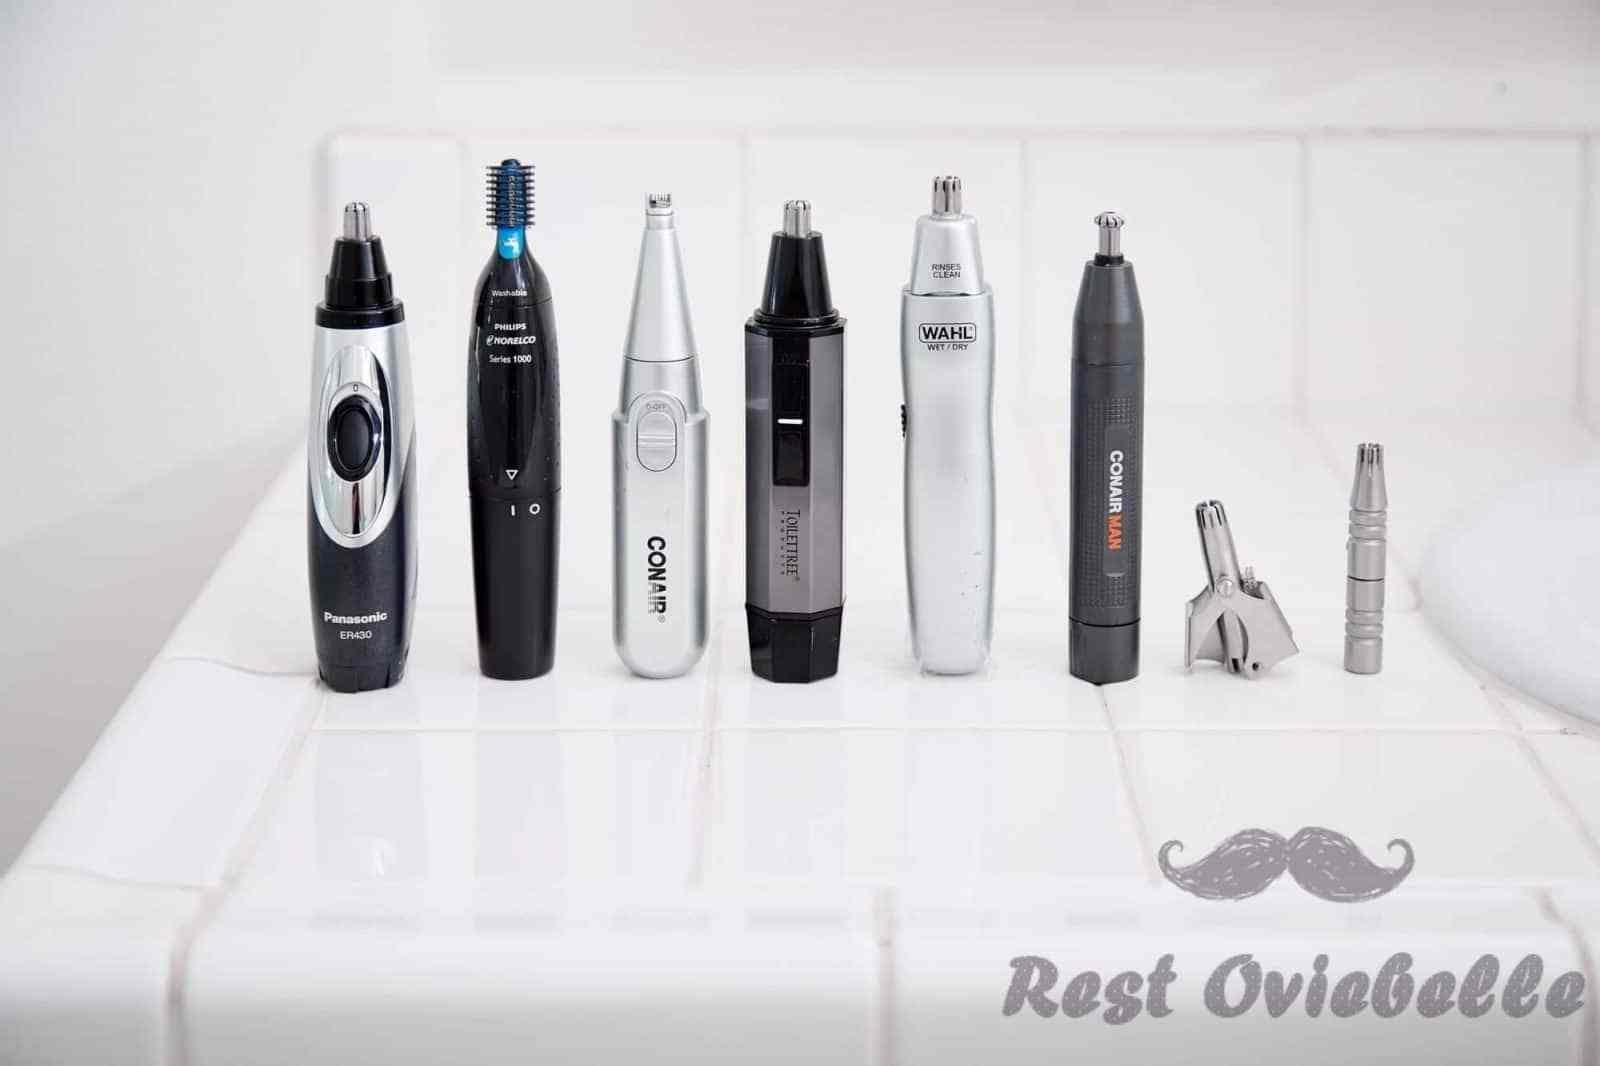 philips norelco series 5000 multigroom 18pc men's rechargeable electric trimmer